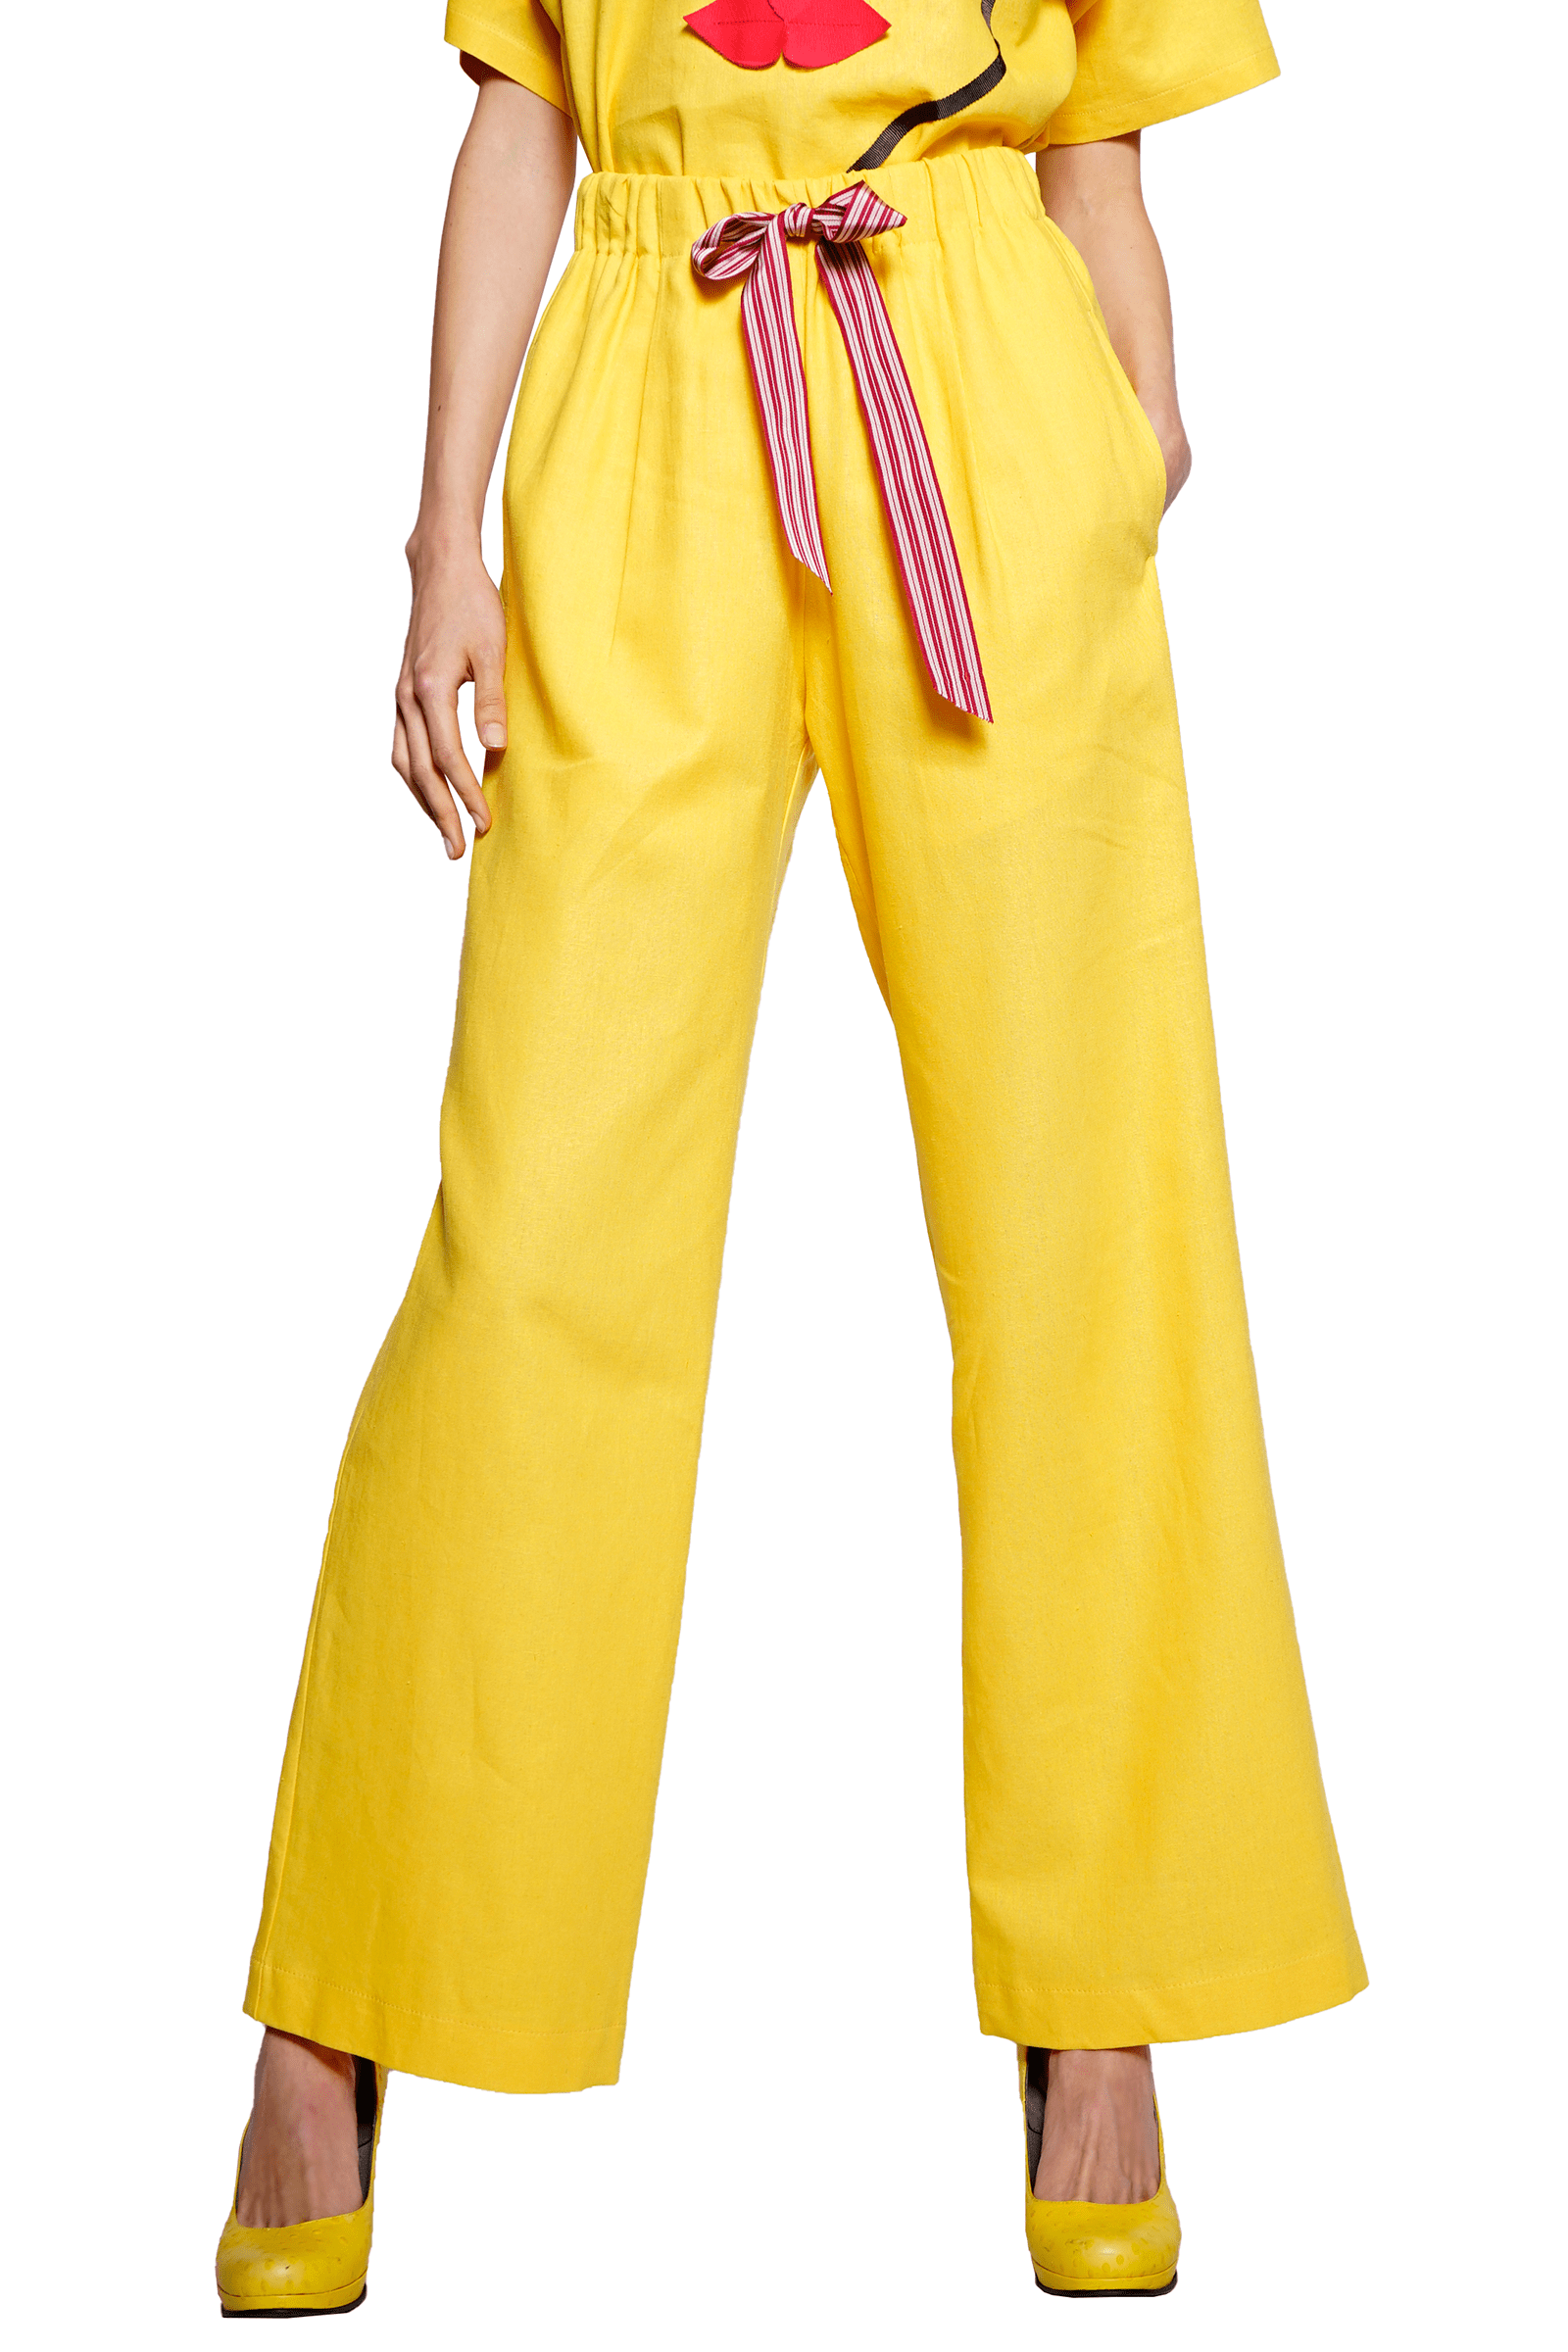 Flared yellow linen trousers